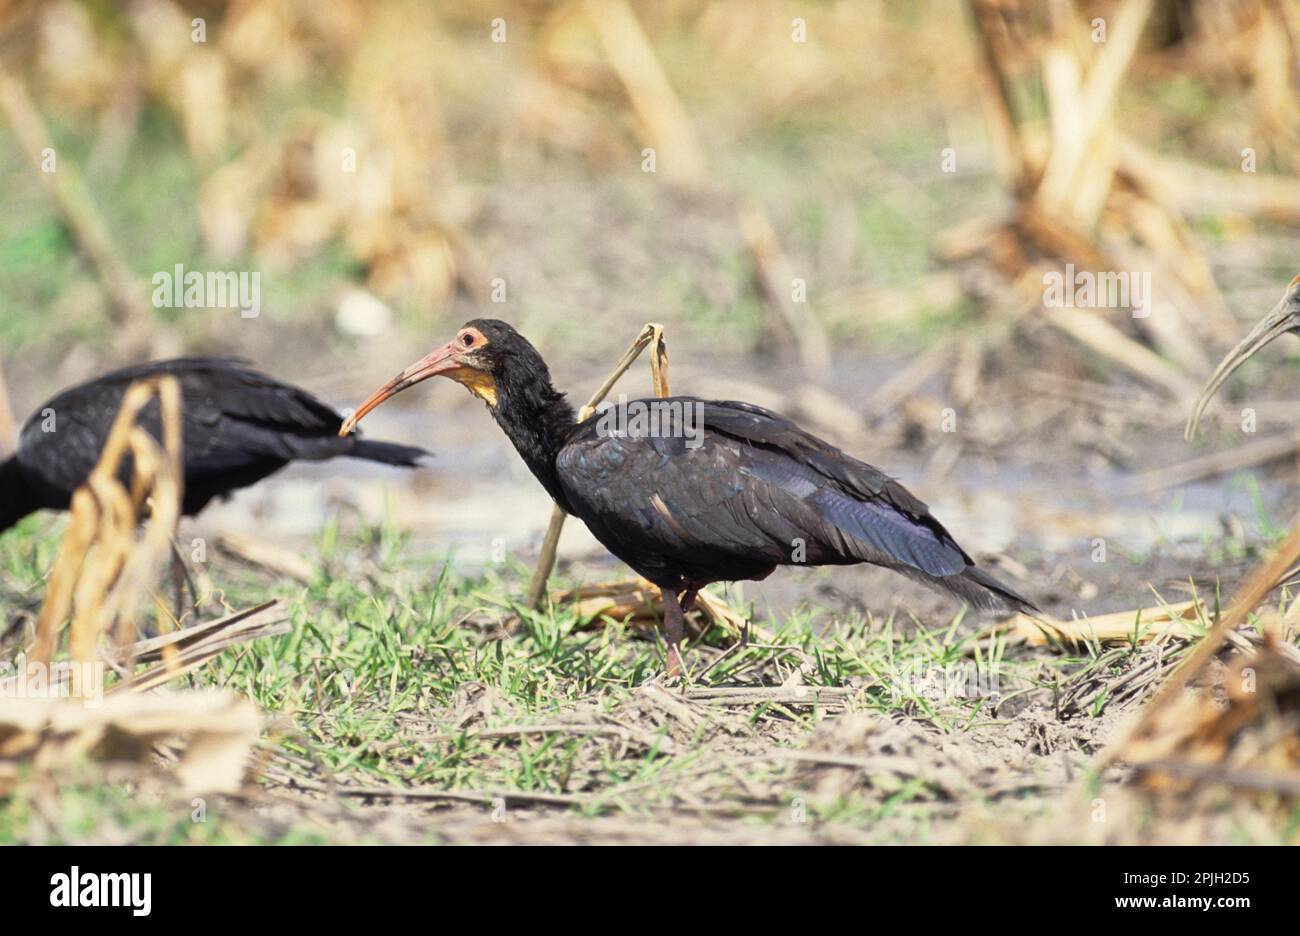 Sharp-tailed ibis (Cercibis oxycerca), Long-tailed Ibis, Sharp-tailed Ibis, Long-tailed Ibis, Sickler, Animals, Birds, Sharp-tailed Ibis Two on the Stock Photo